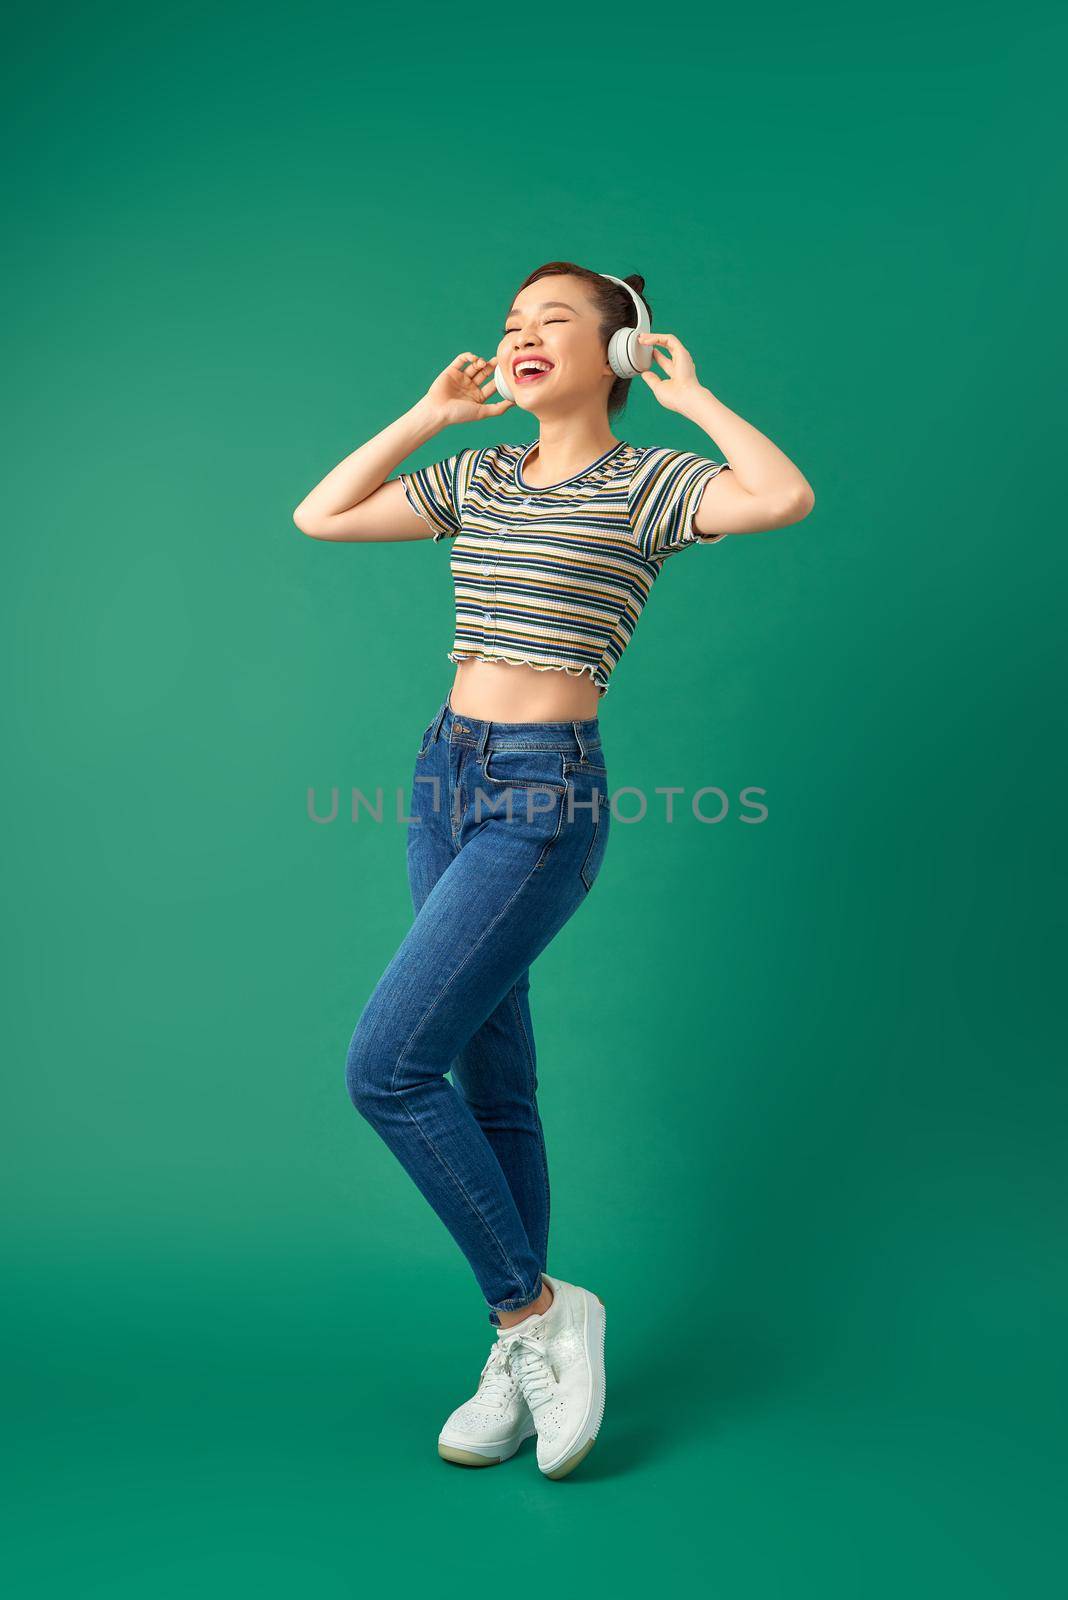 Energy girl with headphones listening to music with closed eyes on green background in studio. Wearing T-shirt, jeans. by makidotvn